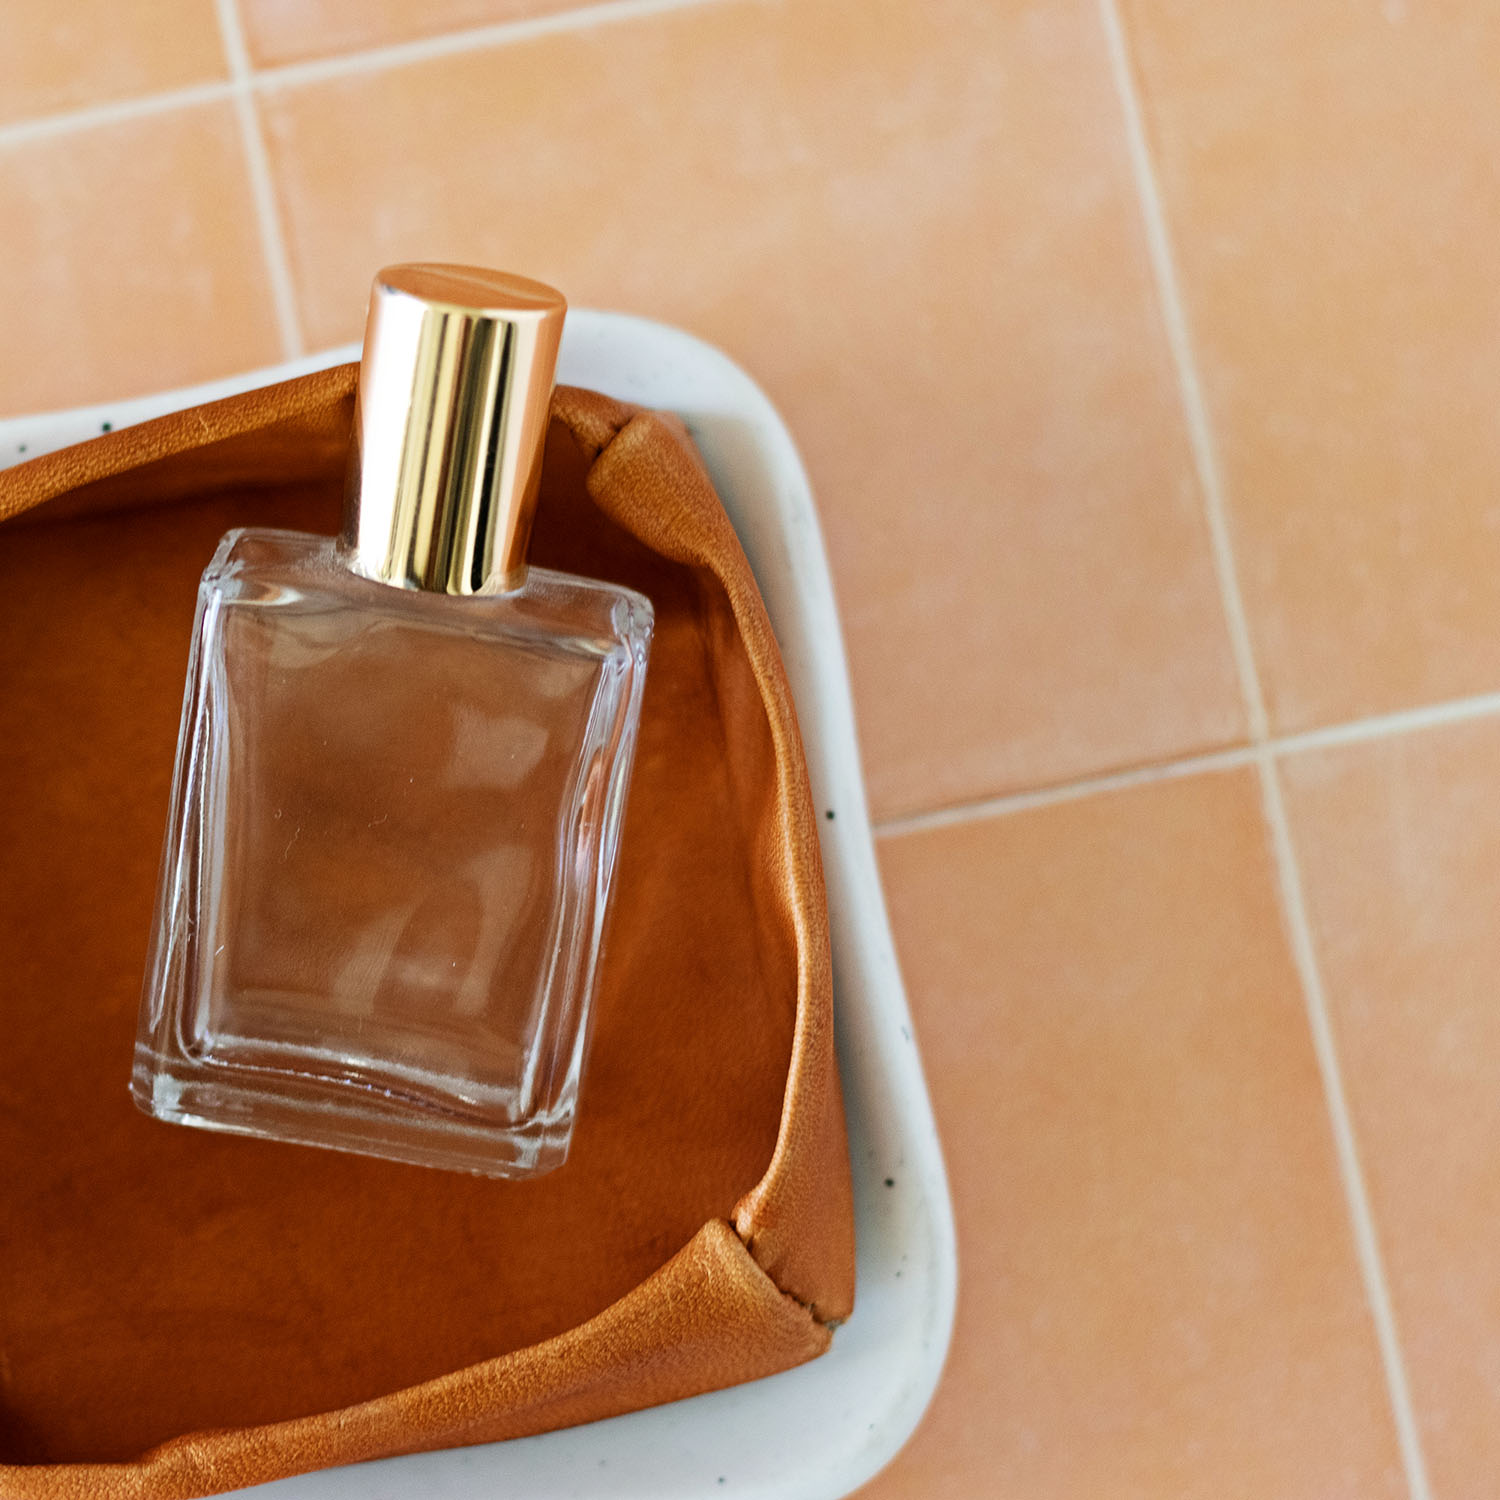 How to Make Cologne with Essential Oils